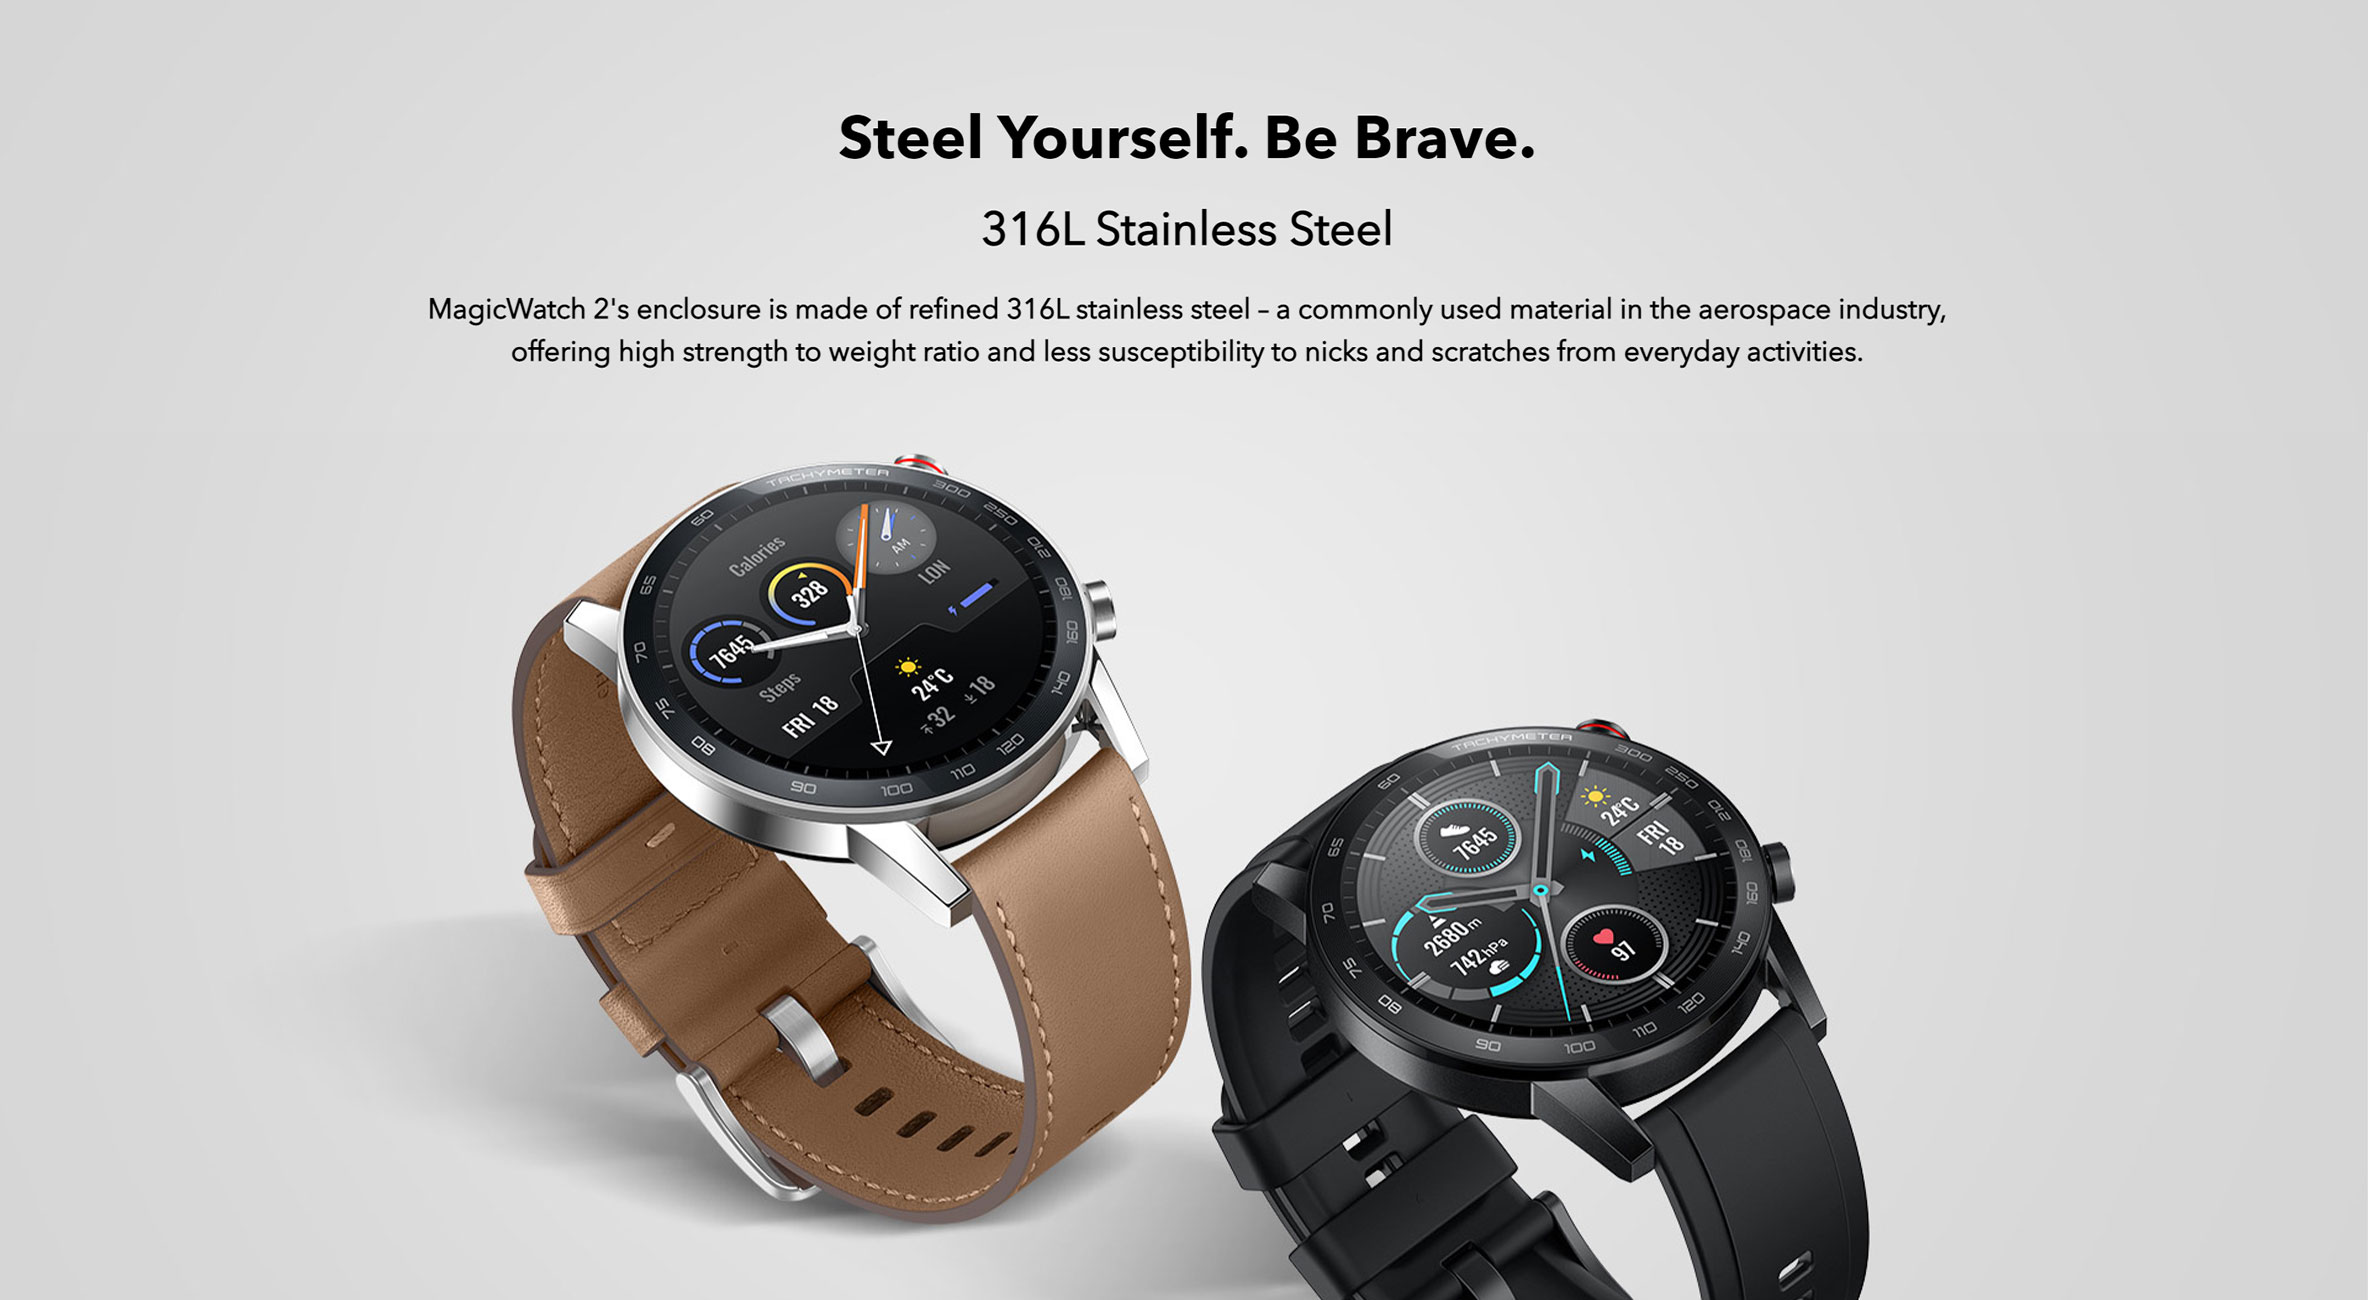 Steel Yourself. Be Brave. 316L Stainless Steel, high strength